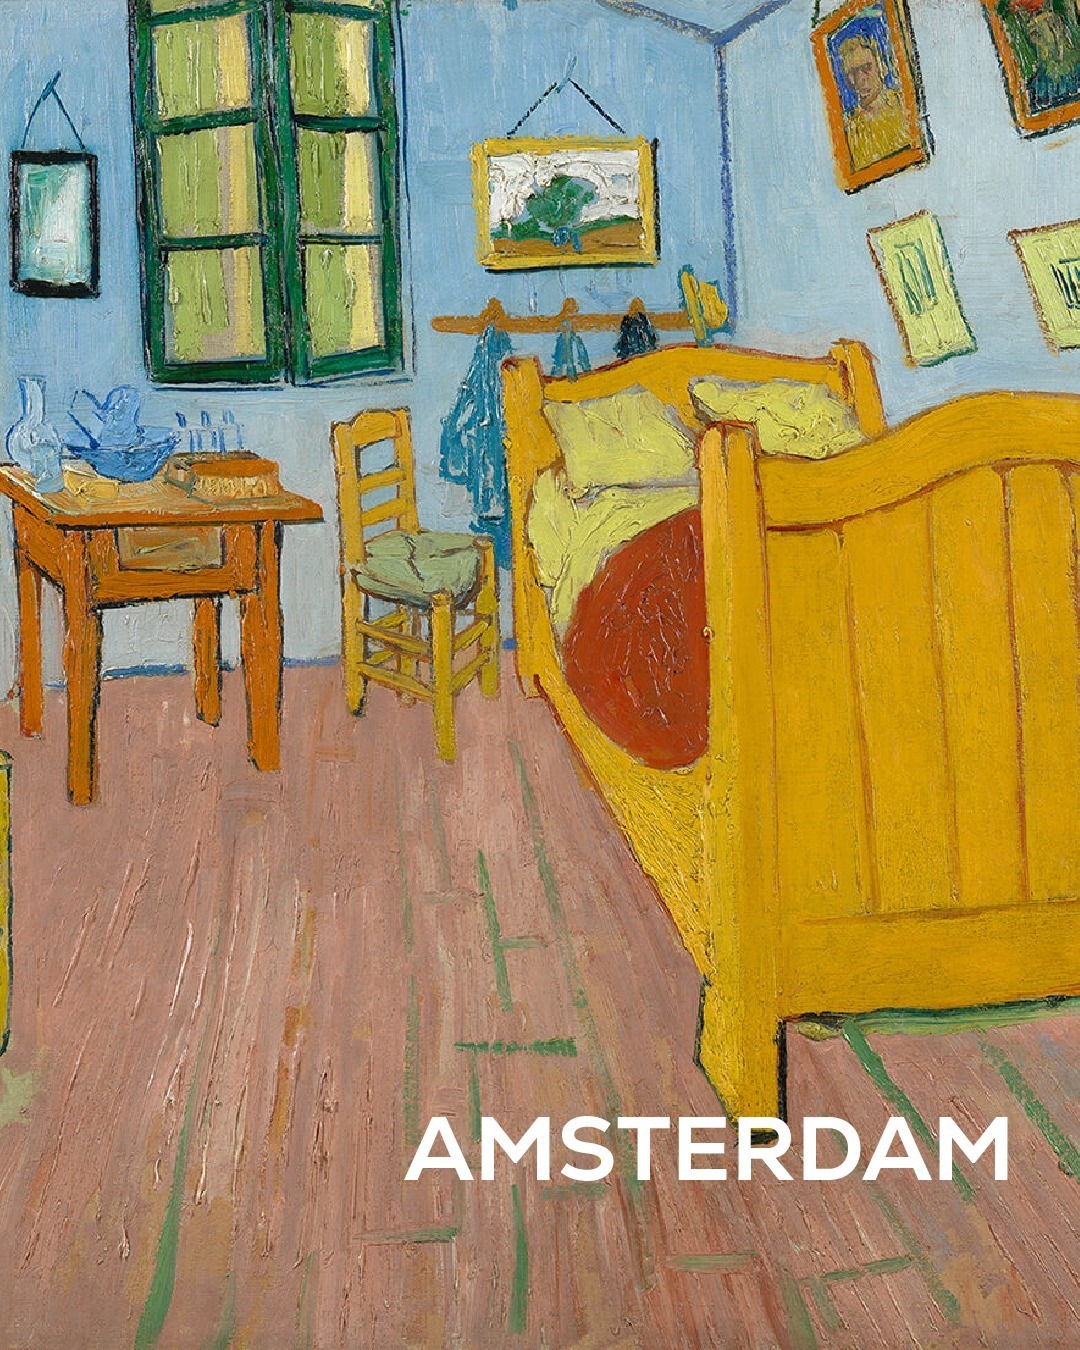 Did you know that Van Gogh painted three versions of his famous painting ‘The Bedroom’? 🛏️ While, at first glance, the three paintings appear almost identical, when examined closely, each reveals distinct and unique details. Take a look at the chair, the bed, the window, the floor and the paintings on the wall. Which one is your favourite? 💭

#vincentmeetsrembrandt #vangogh #thebedroom #vangoghpainting #vangoghart #amsterdamart